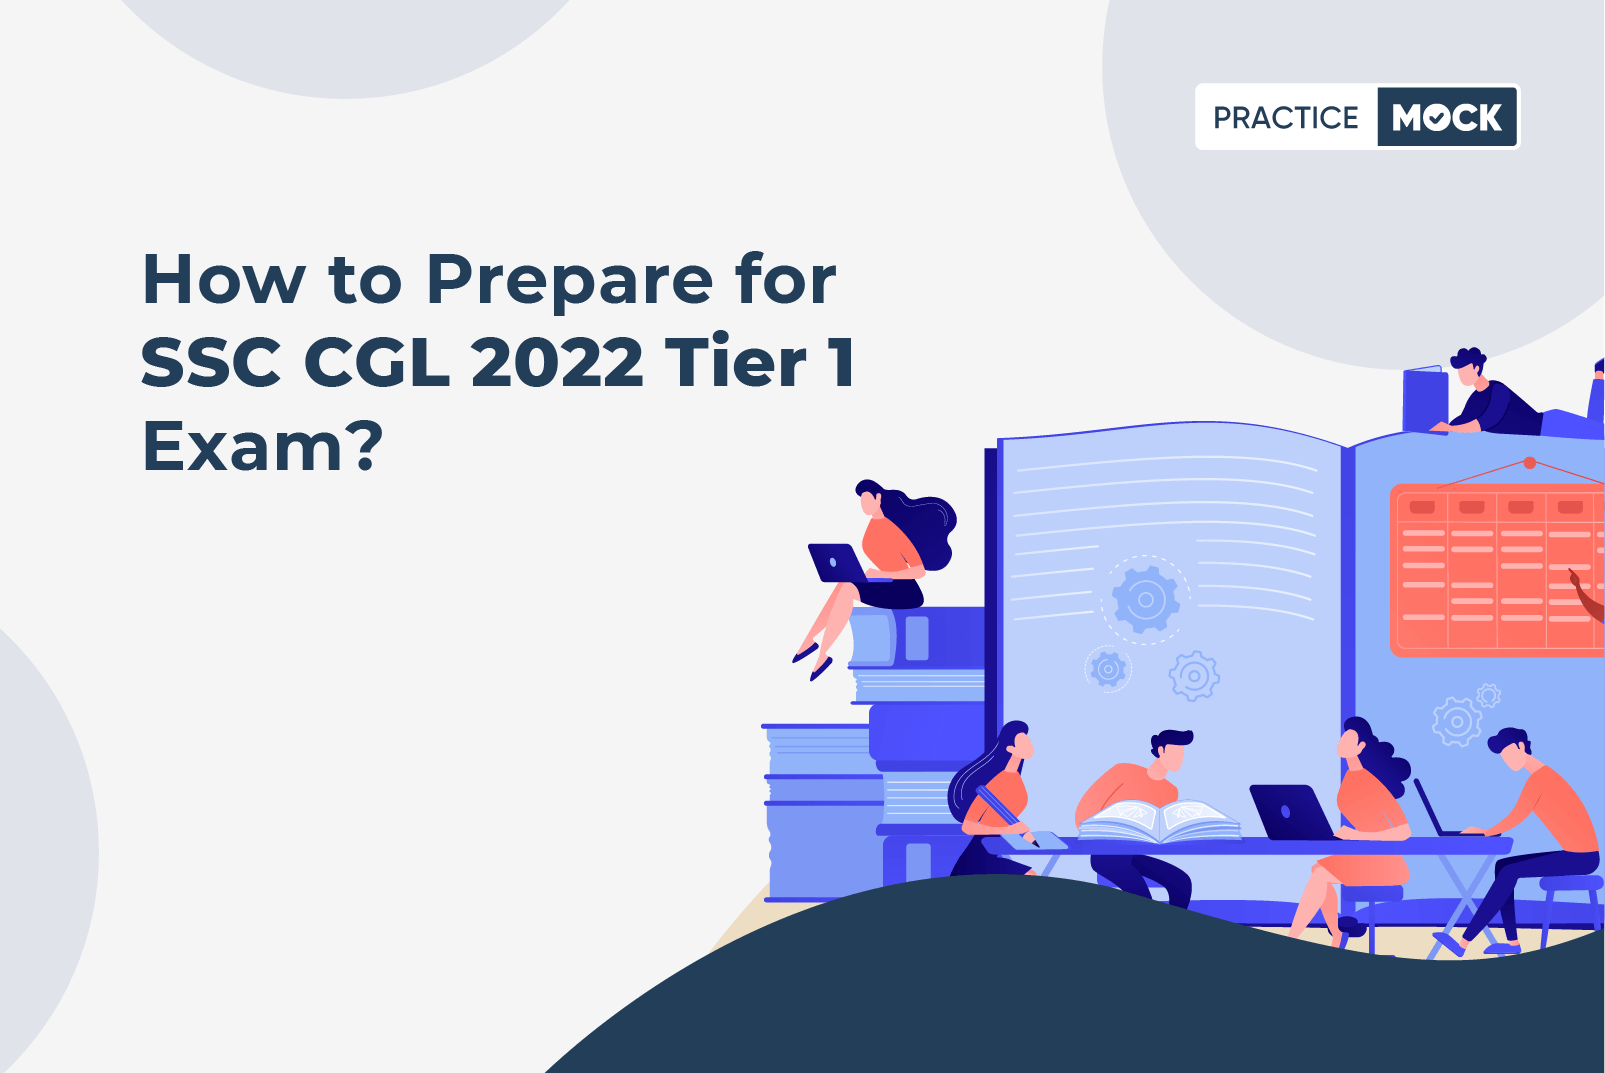 Preparation Tips for SSC CGL 2022 English for Tier-I